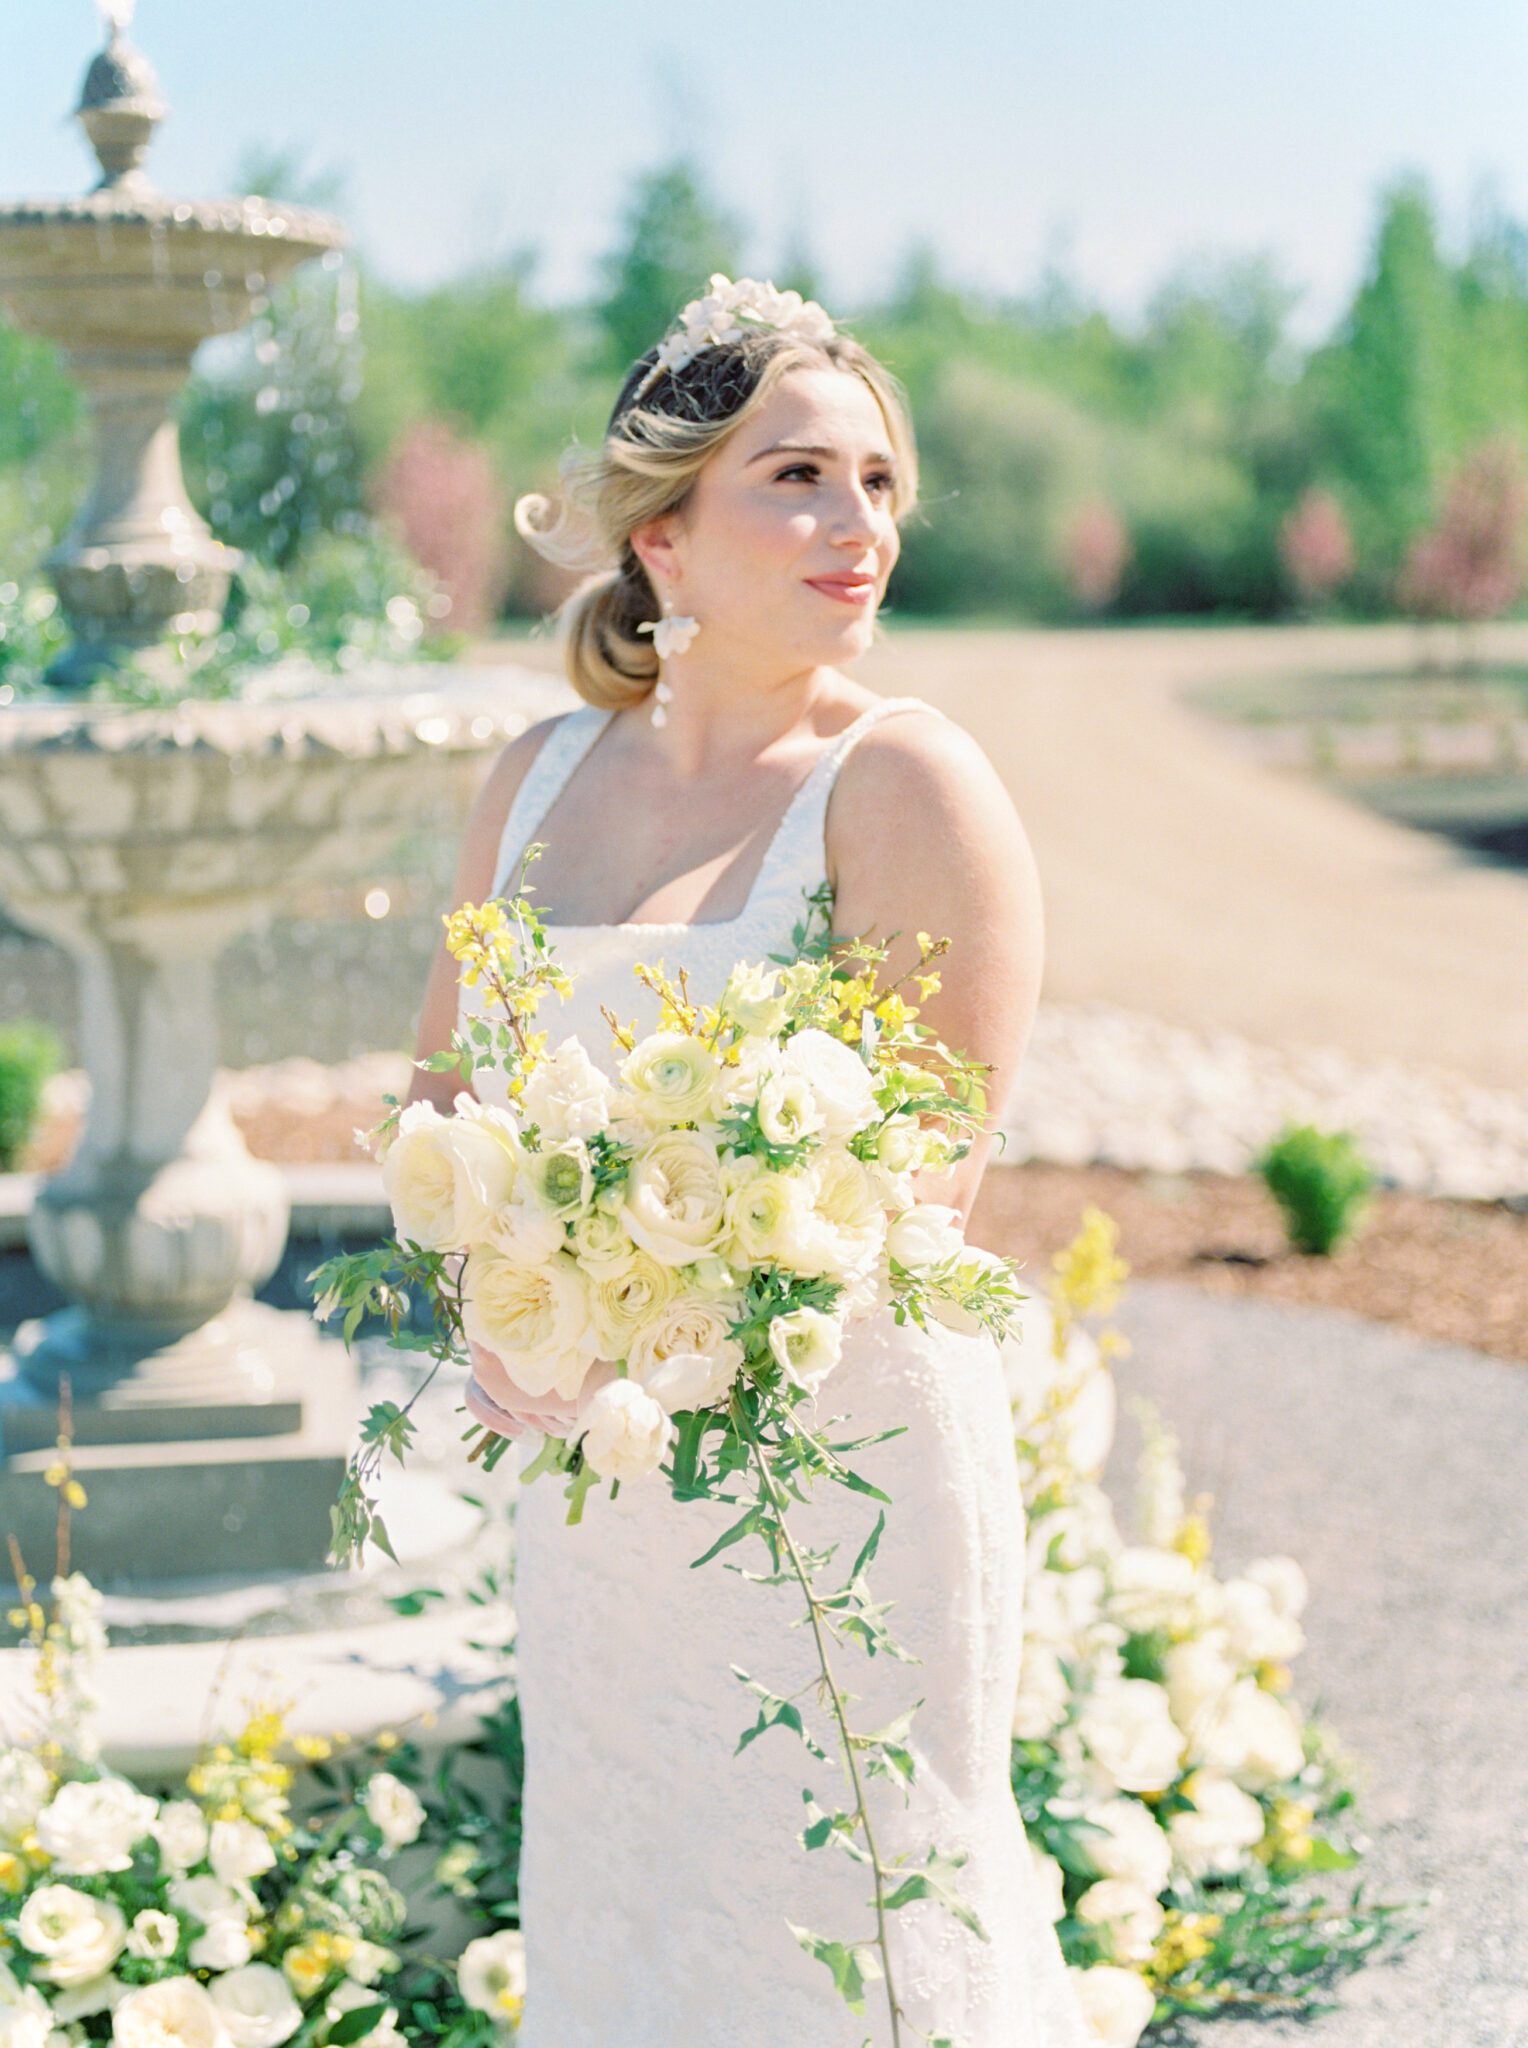 Elegant bride wearing a sophisticated yet whimsical bridal gown from Delica Bridal and floral jewellery by Joanna Bisley Designs, holding pale yellow and ivory floral bouquet for the perfect spring wedding inspiration. 